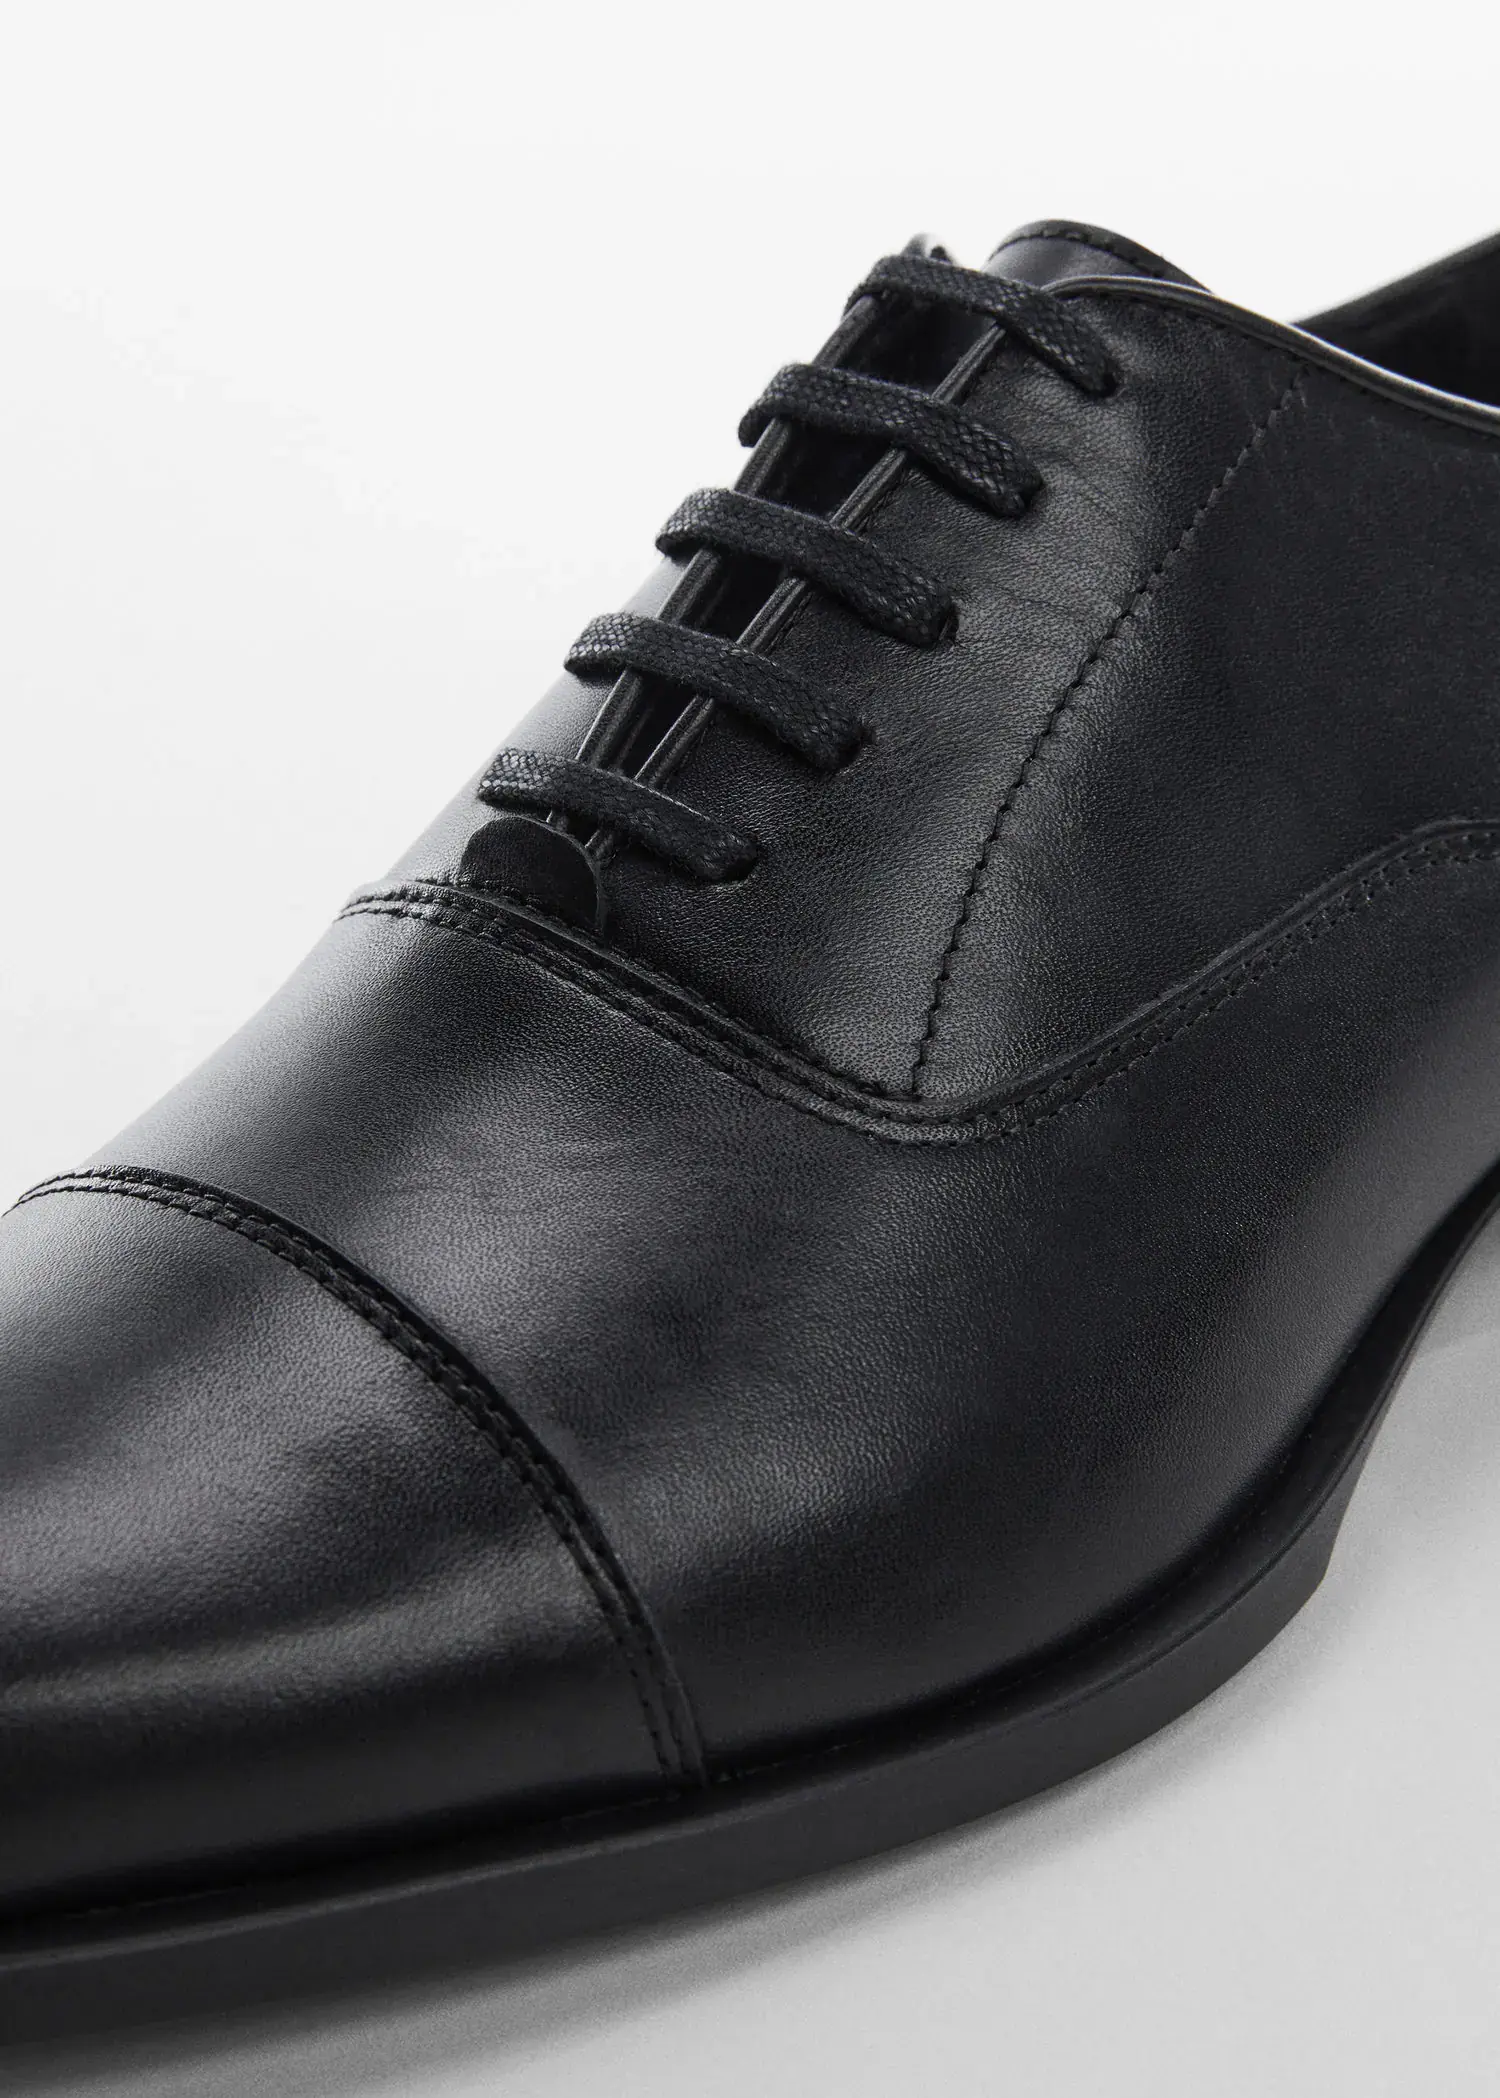 Mango Elongated leather suit shoes. a close-up view of a pair of black shoes. 